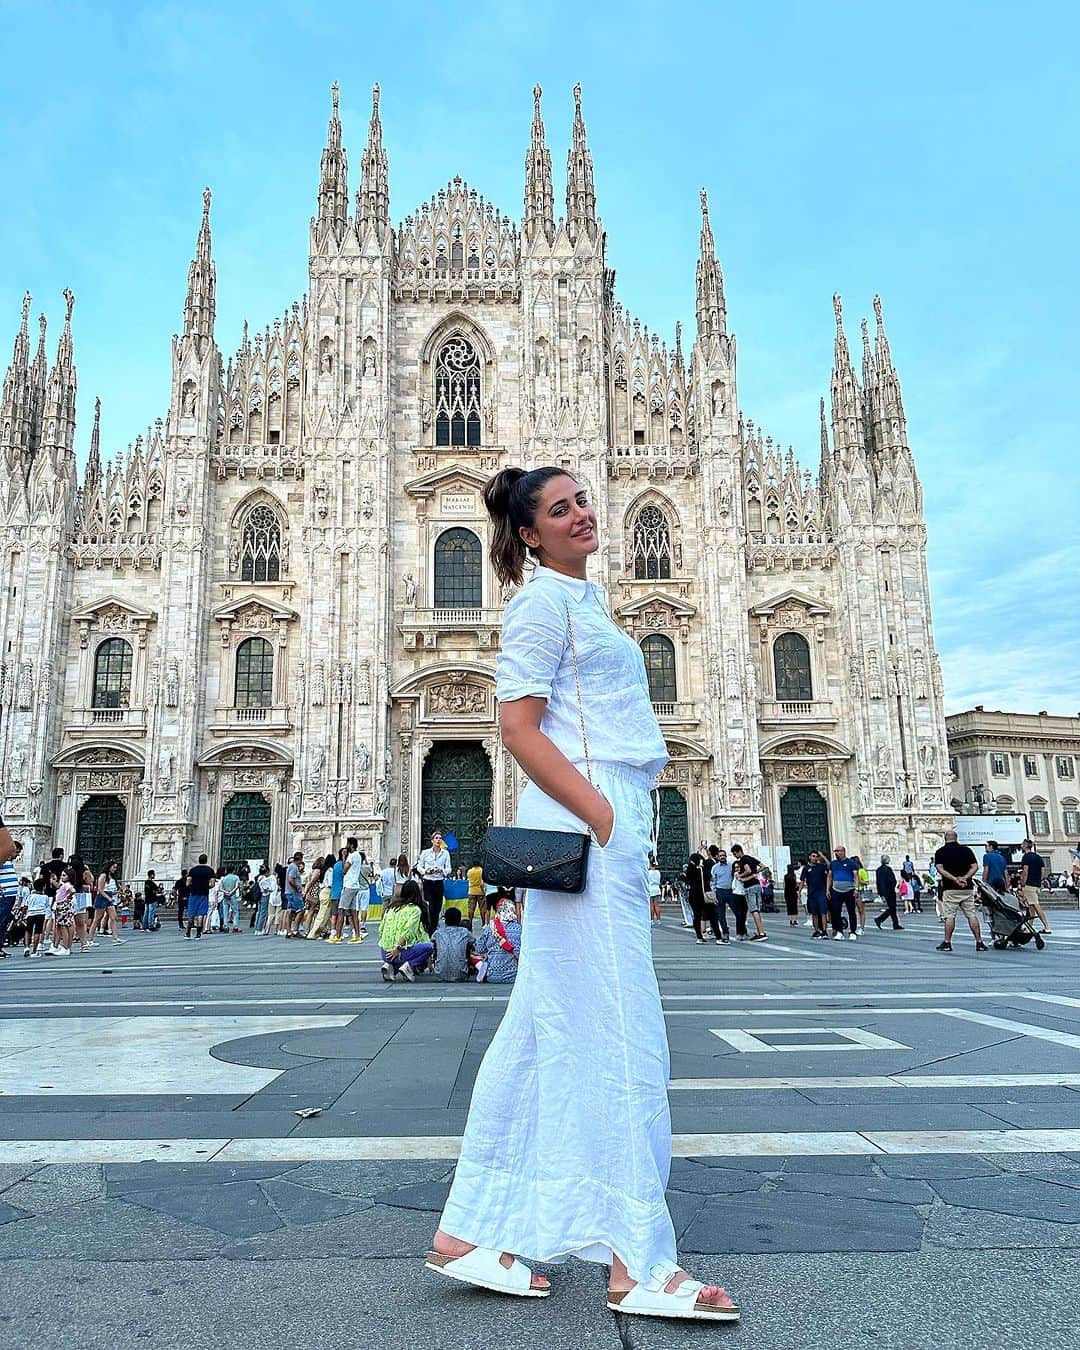 Nargis Fakhri のインスタグラム：「An Architectural Master piece! 🇮🇹   Milan Cathedral, called Duomo di Milano in Italian, is one of the world's largest Gothic cathedrals, located in the heart of the city.   Europe Summer 2023 🥰 .  . . . . #travel #europe #europesummer2023 #italy #milano #nargisfakhri #duomomilano」